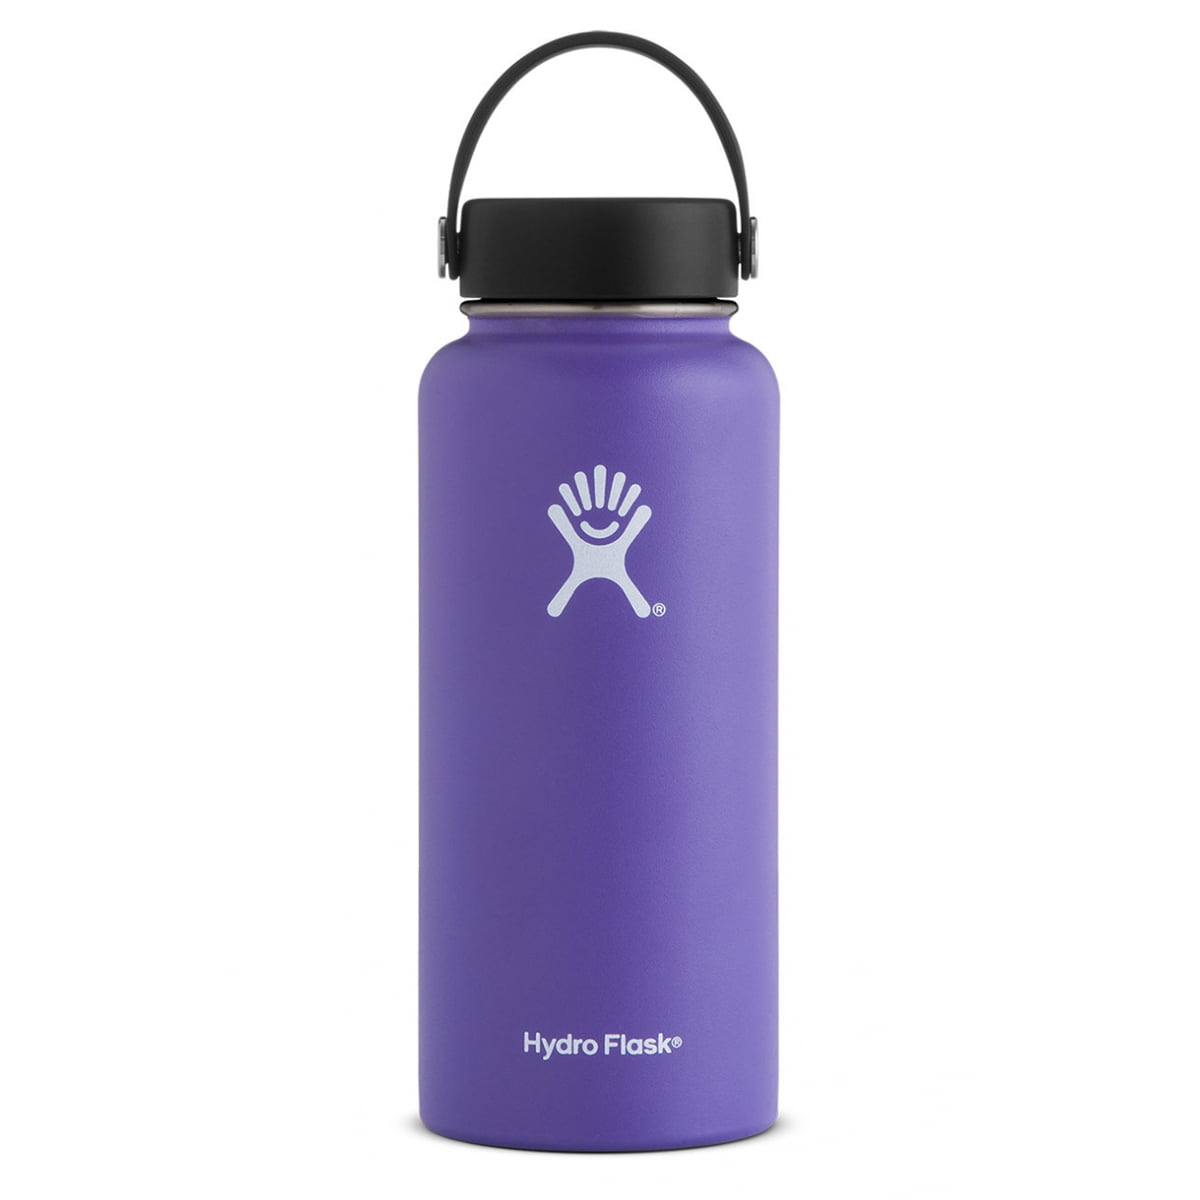 hydro flask official website